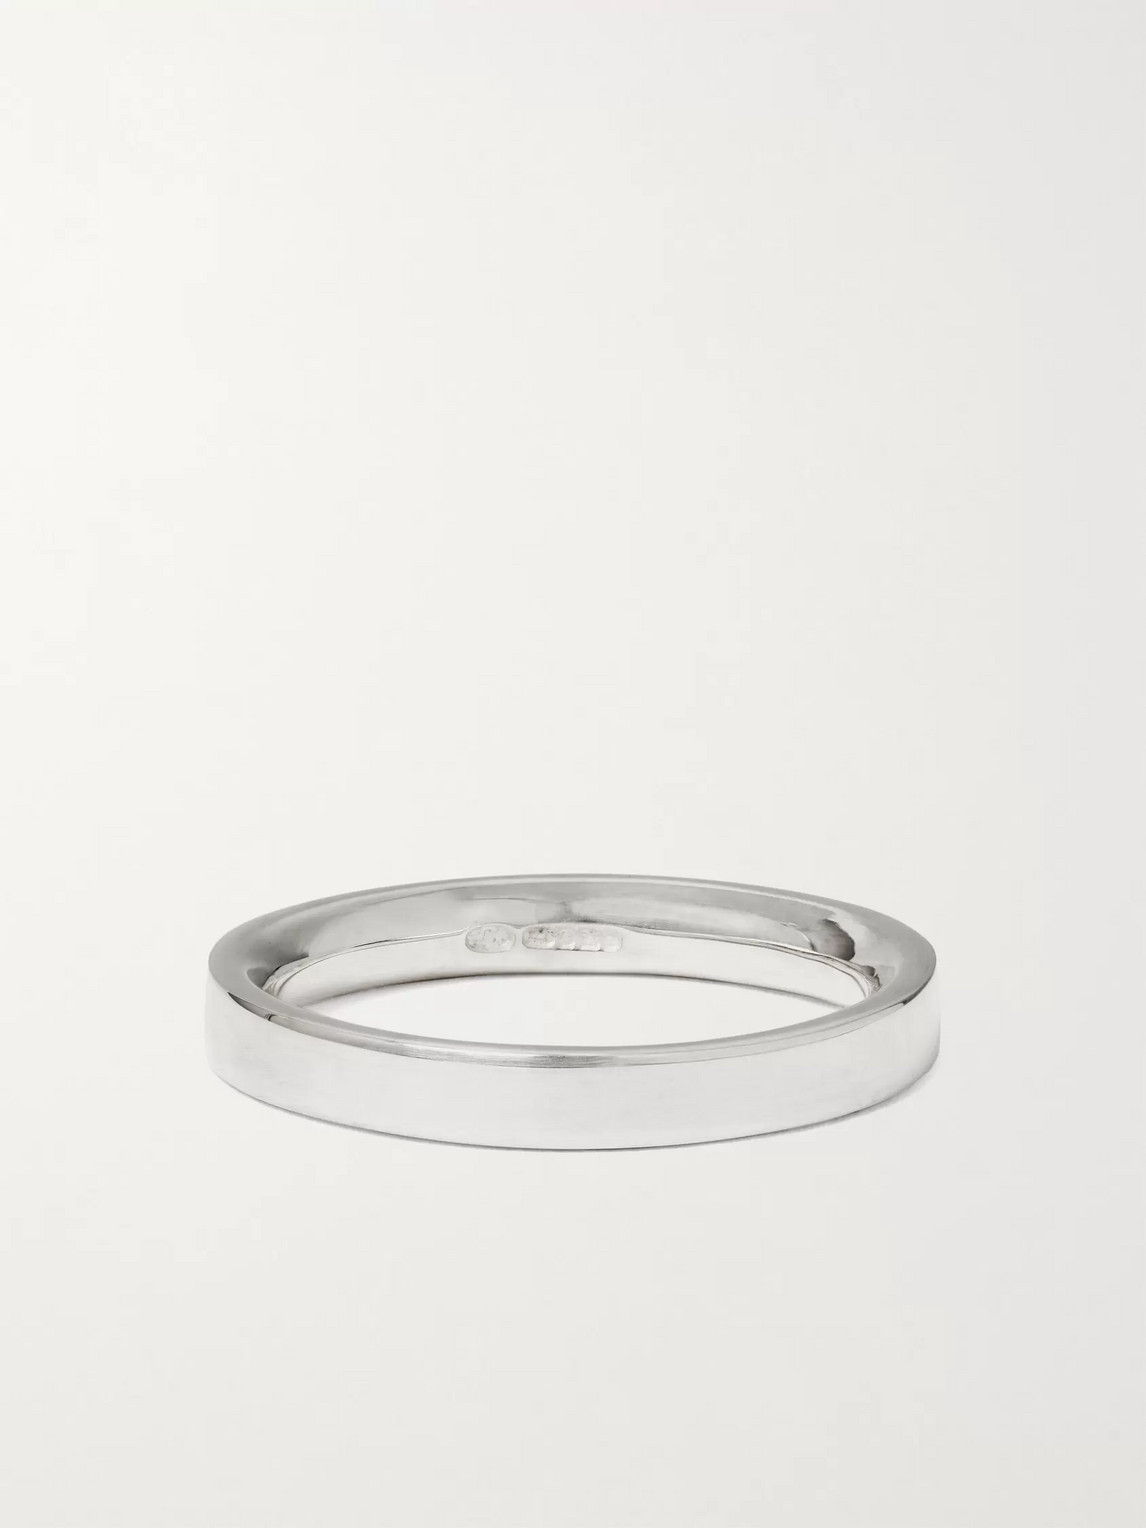 Alice Made This P4 Bancroft Sterling Silver Ring